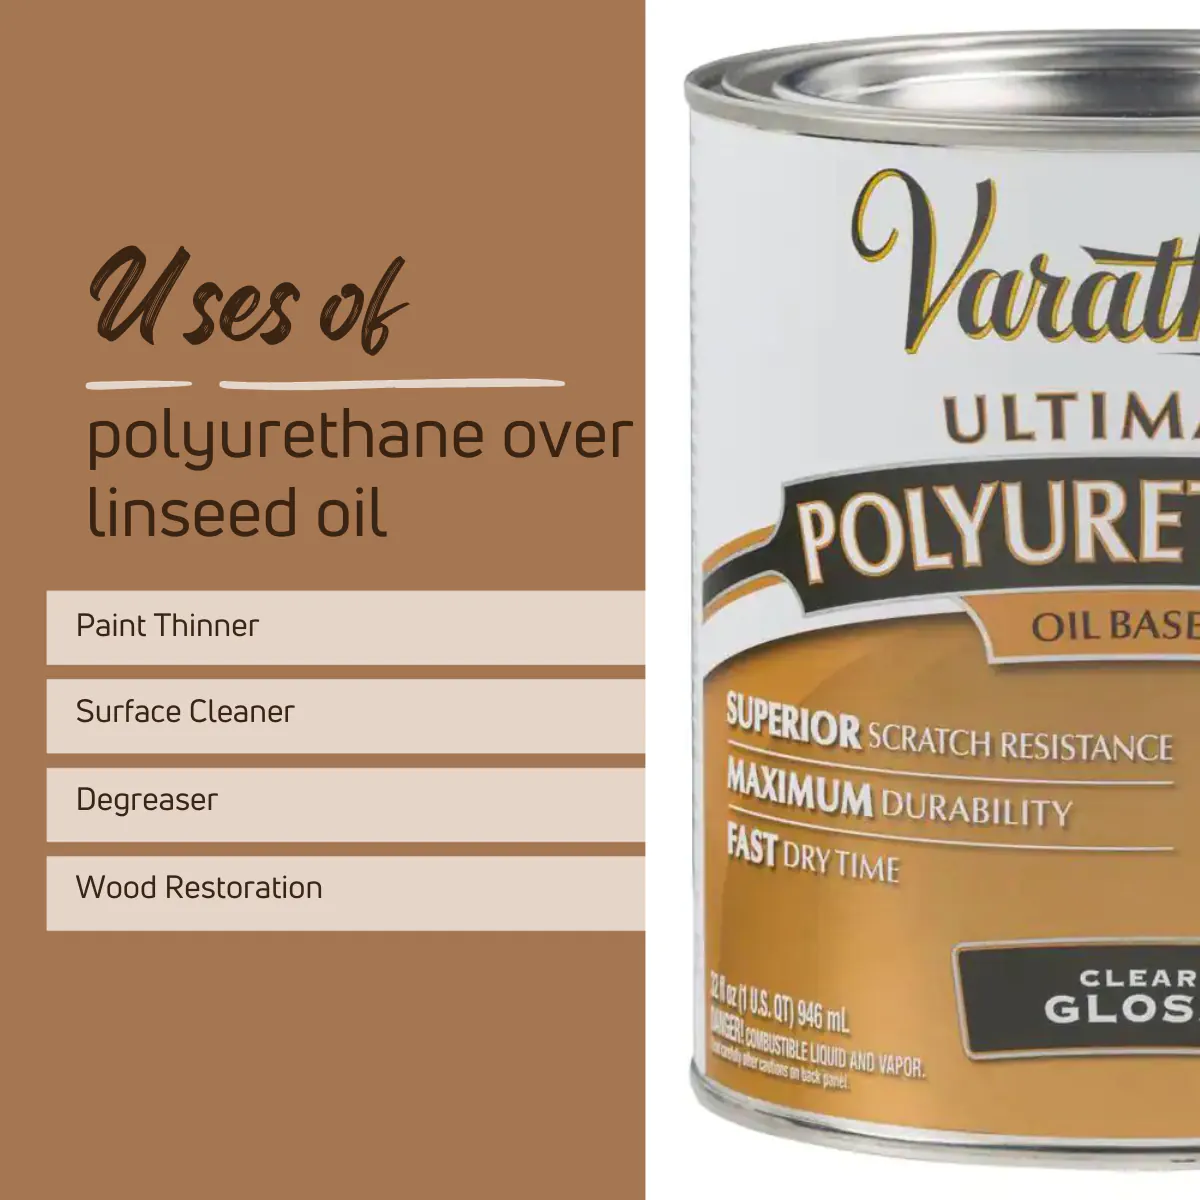 Uses of polyurethane over linseed oil